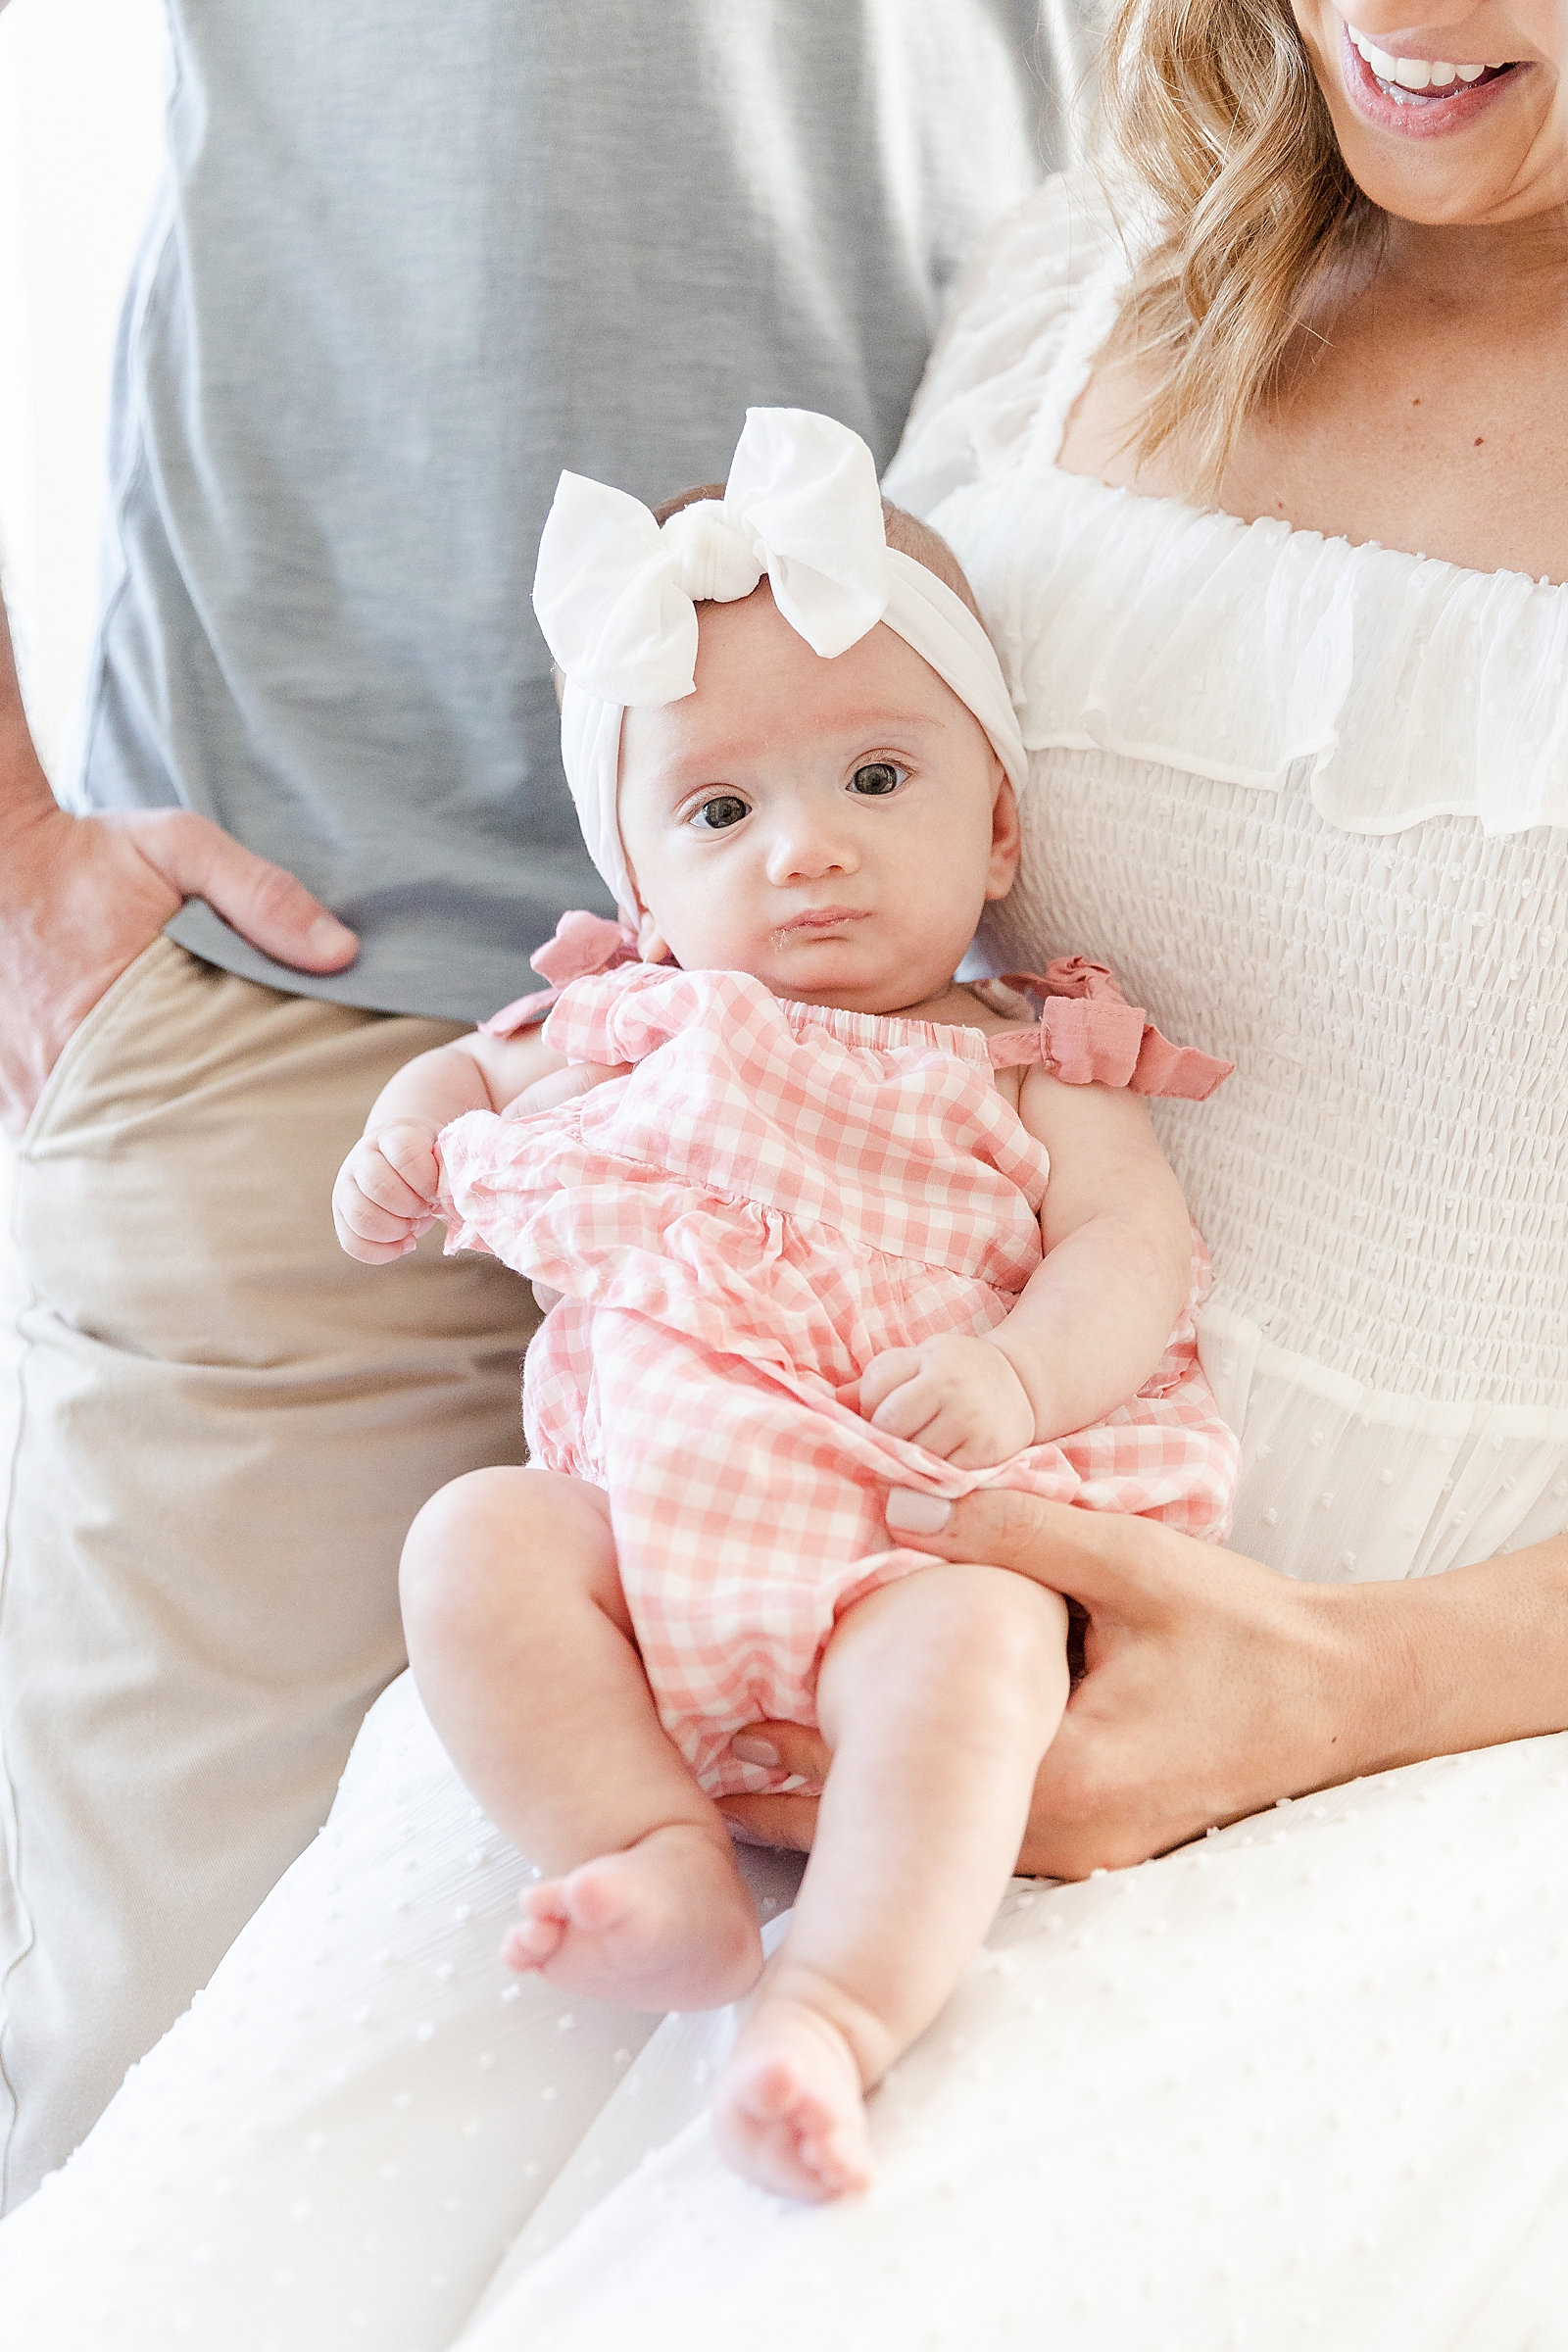 mom holding baby with dad in the background baby with white bow and pink plaid romper sitting and looking at camera